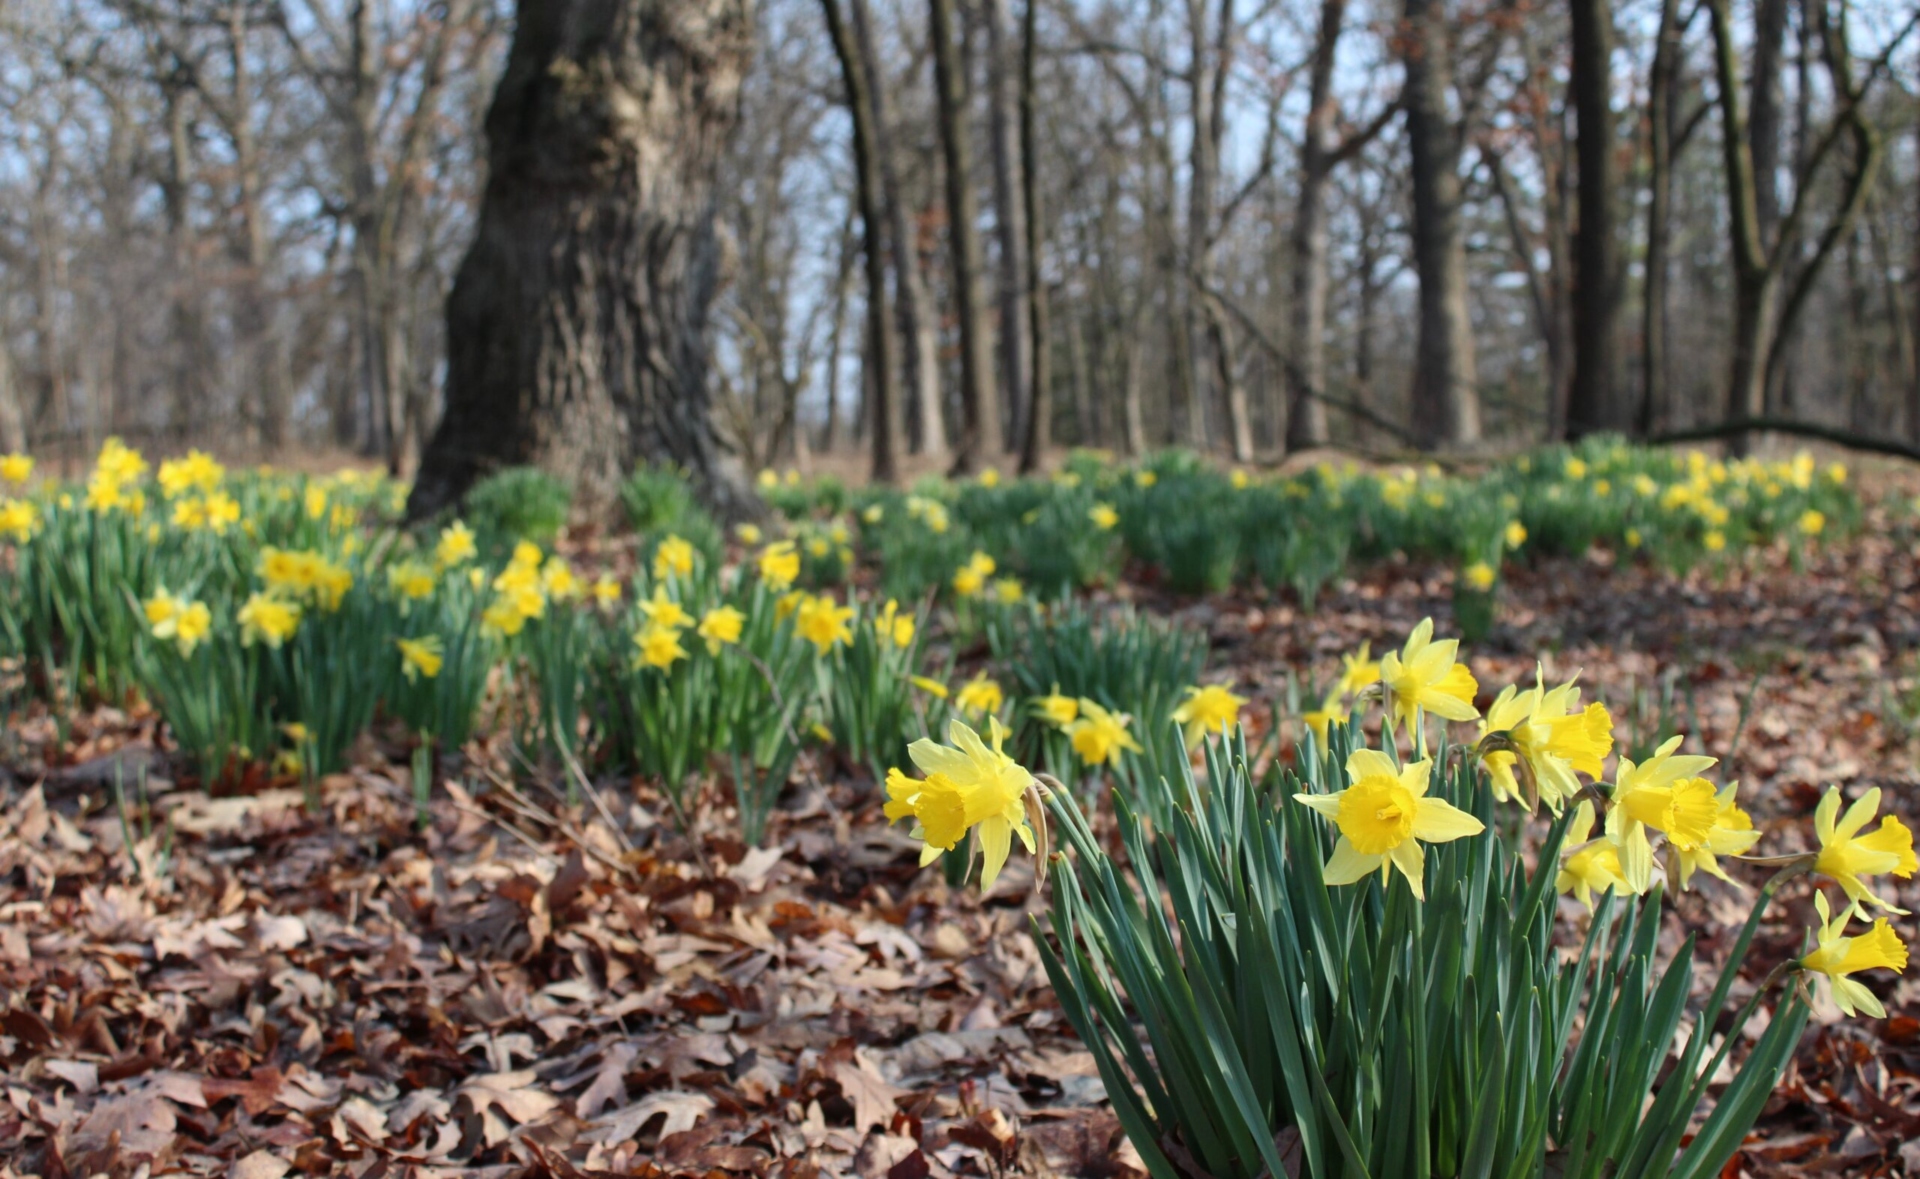 Daffodils in bloom on the Arboretum's West Side